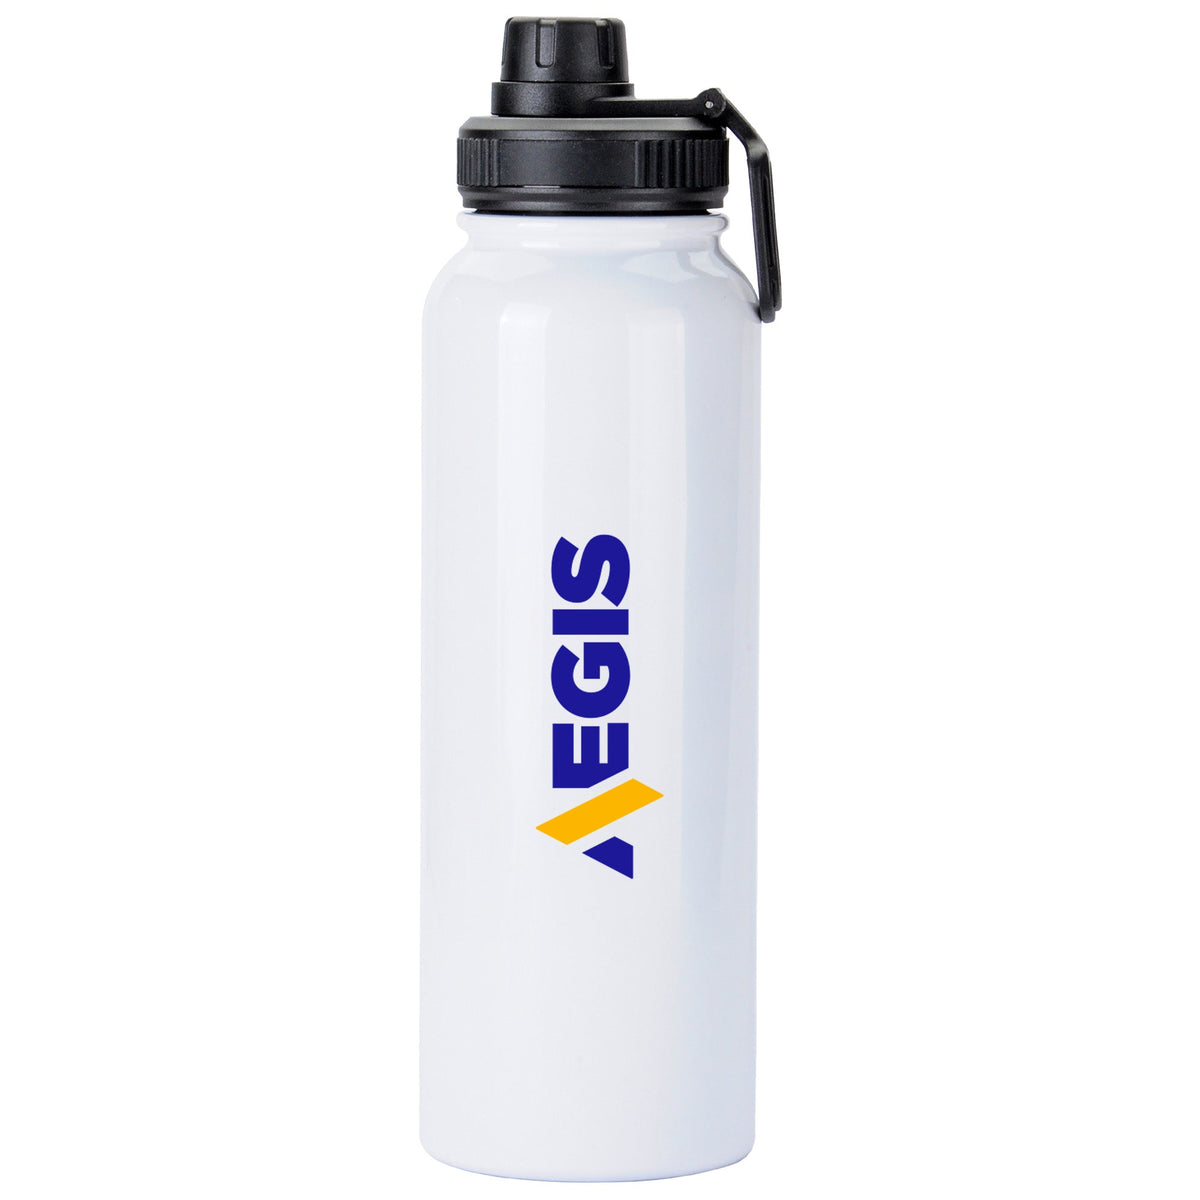 Water Bottle w/ Carry Handle - 33 oz. | White